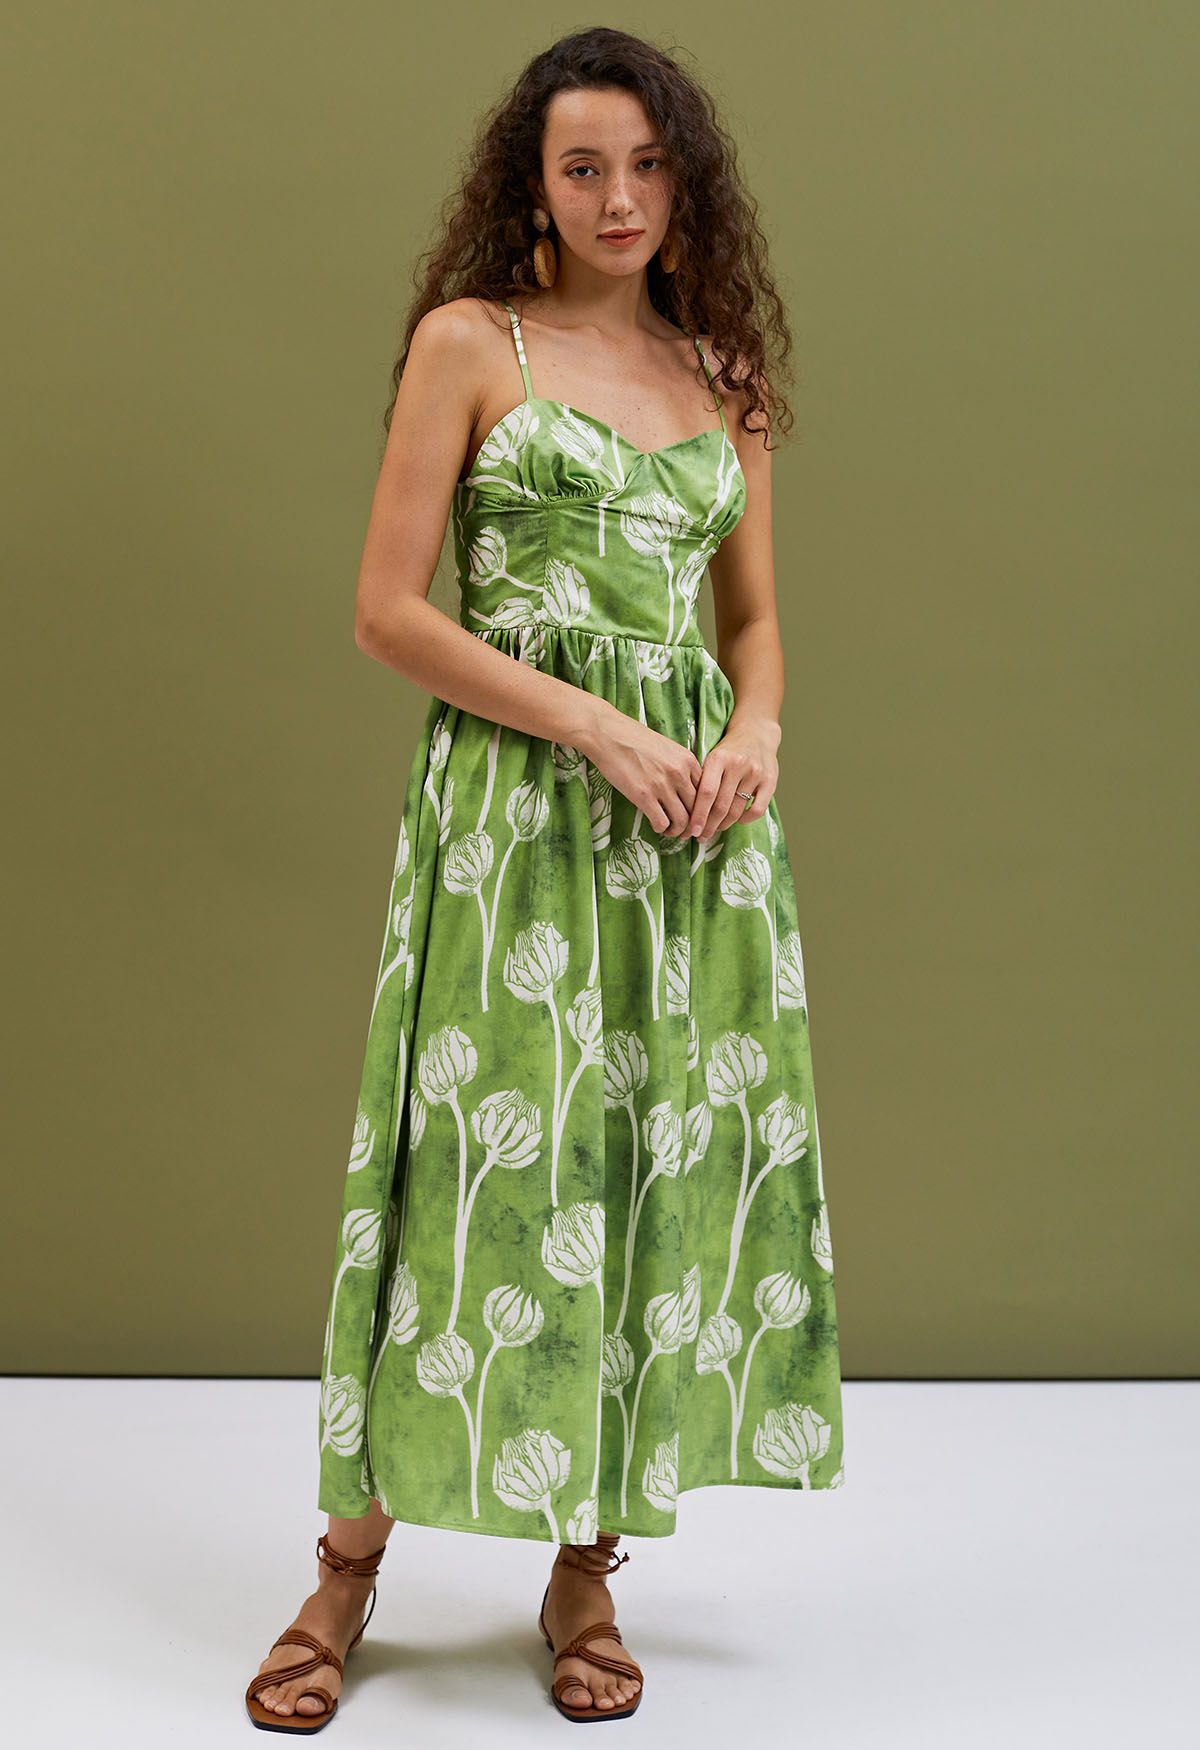 Green Twin Flower Buds Printed Cami Dress - Retro, Indie and Unique Fashion